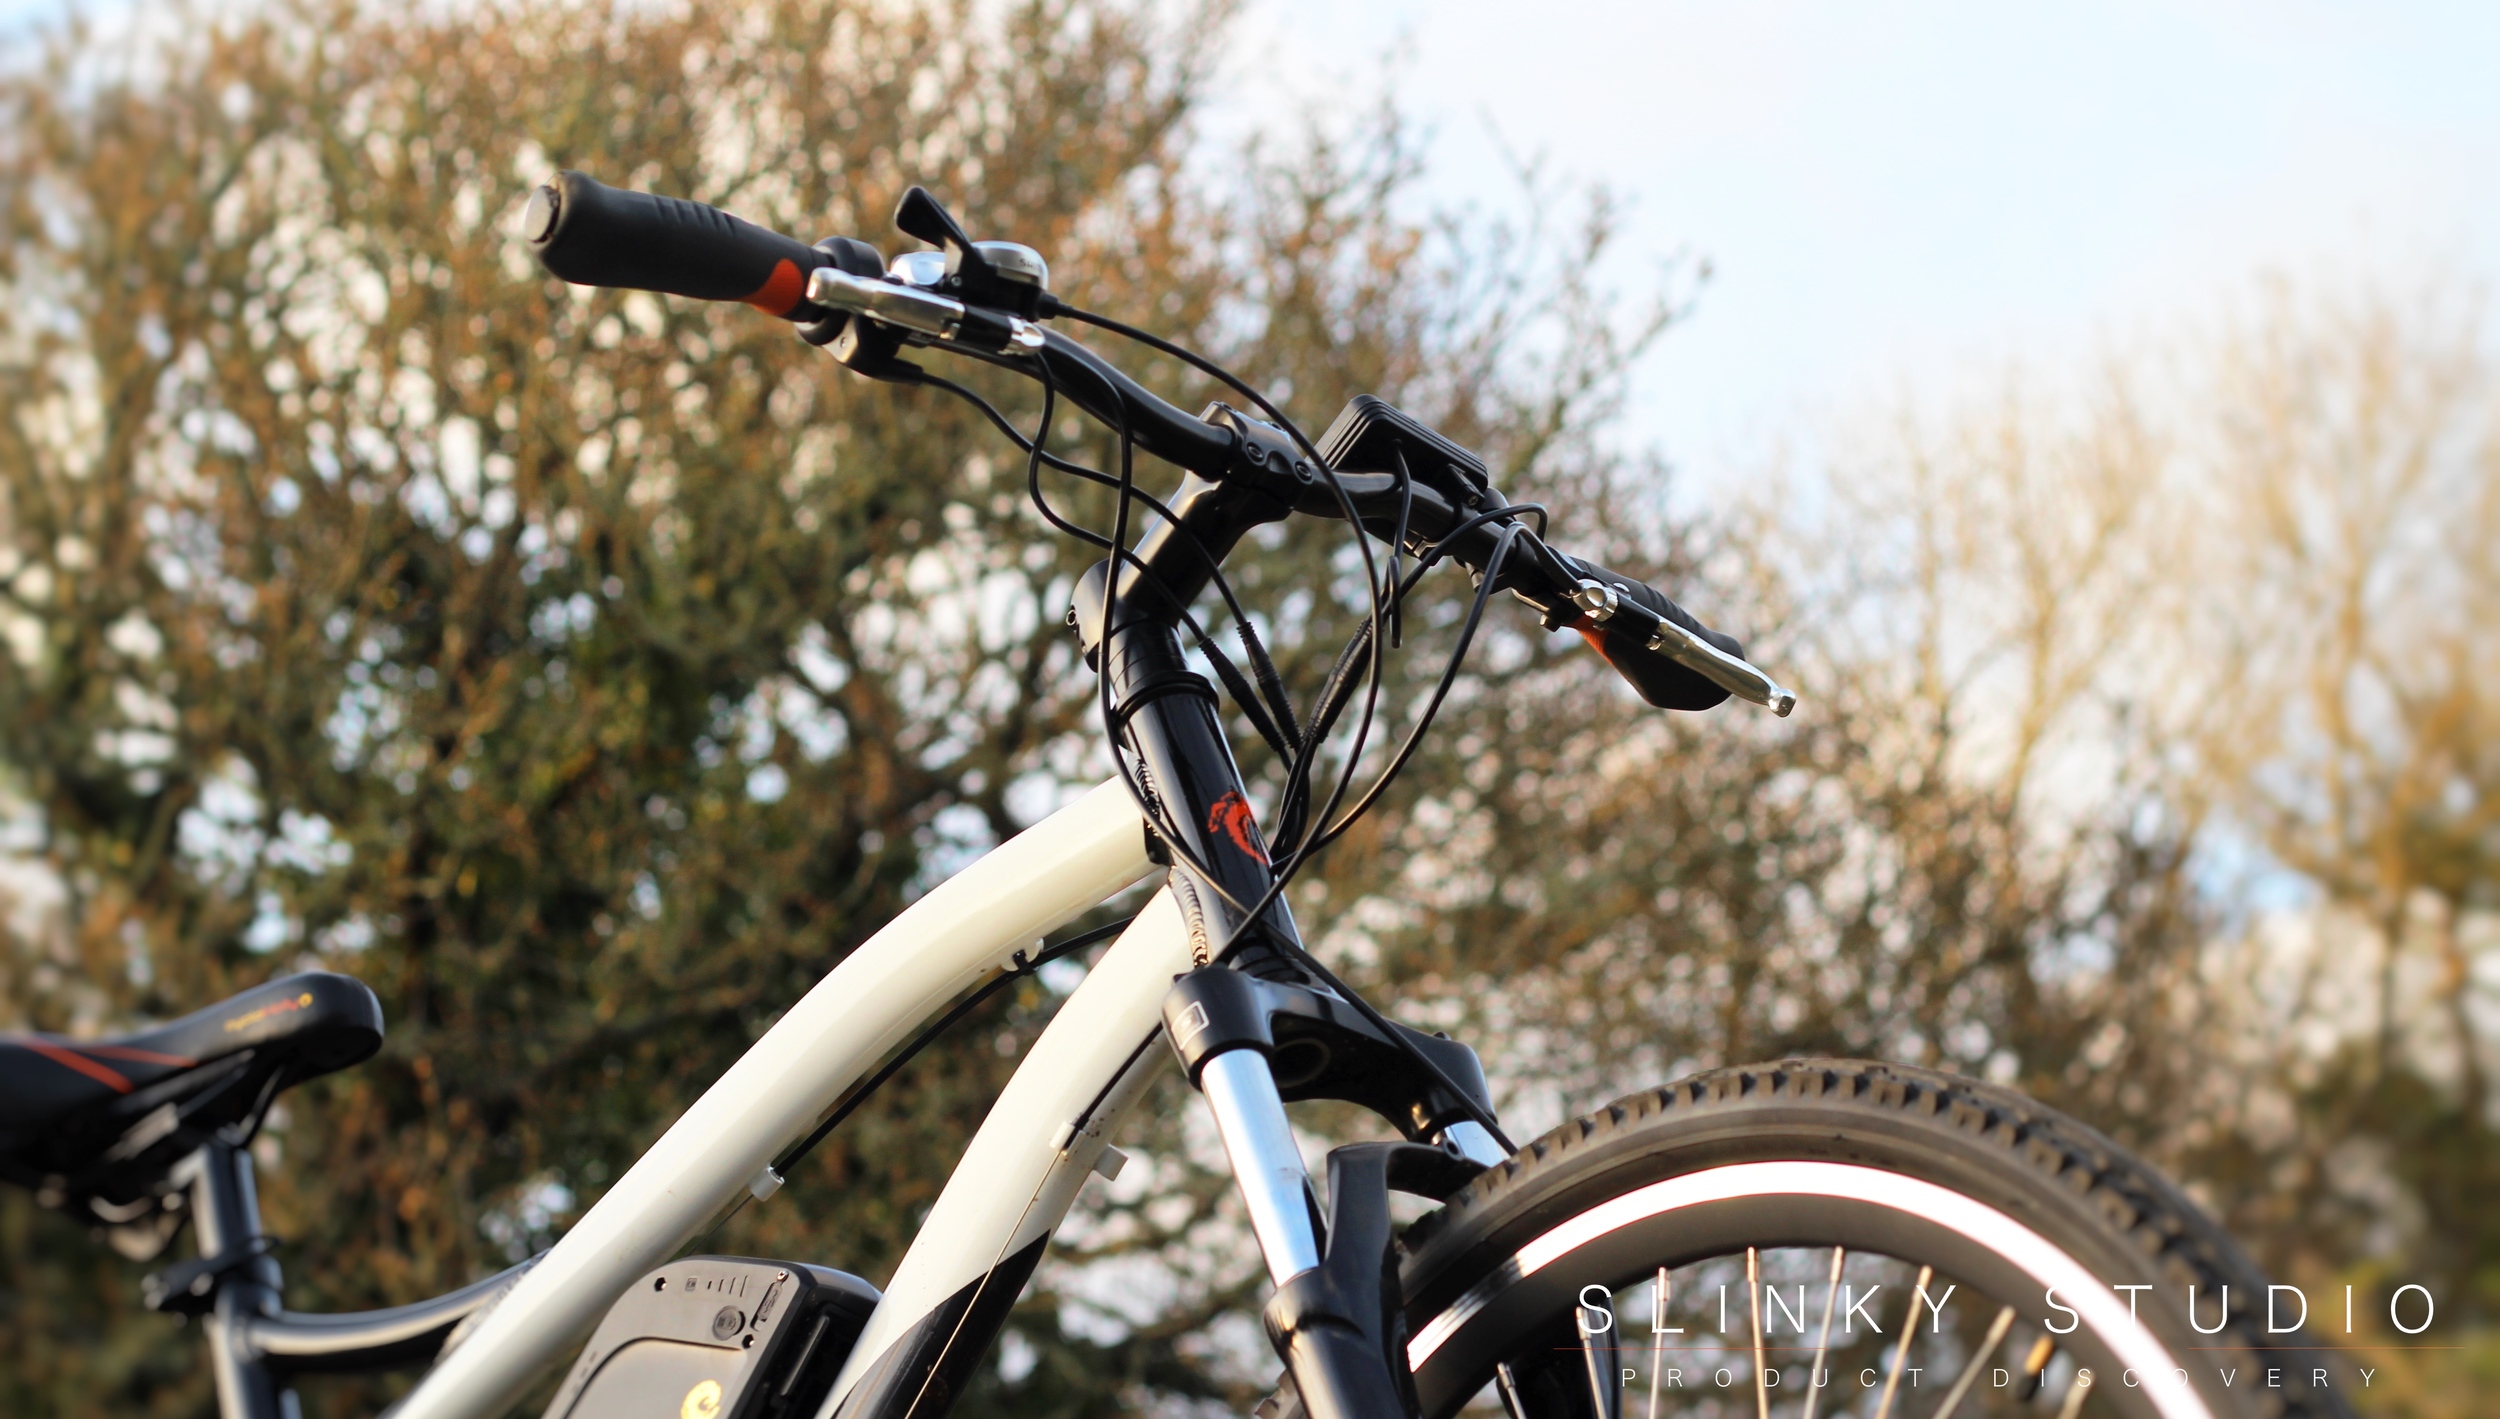 Cyclotricity Stealth eBike Front View Looking Upwards Through Tree Branches.jpg